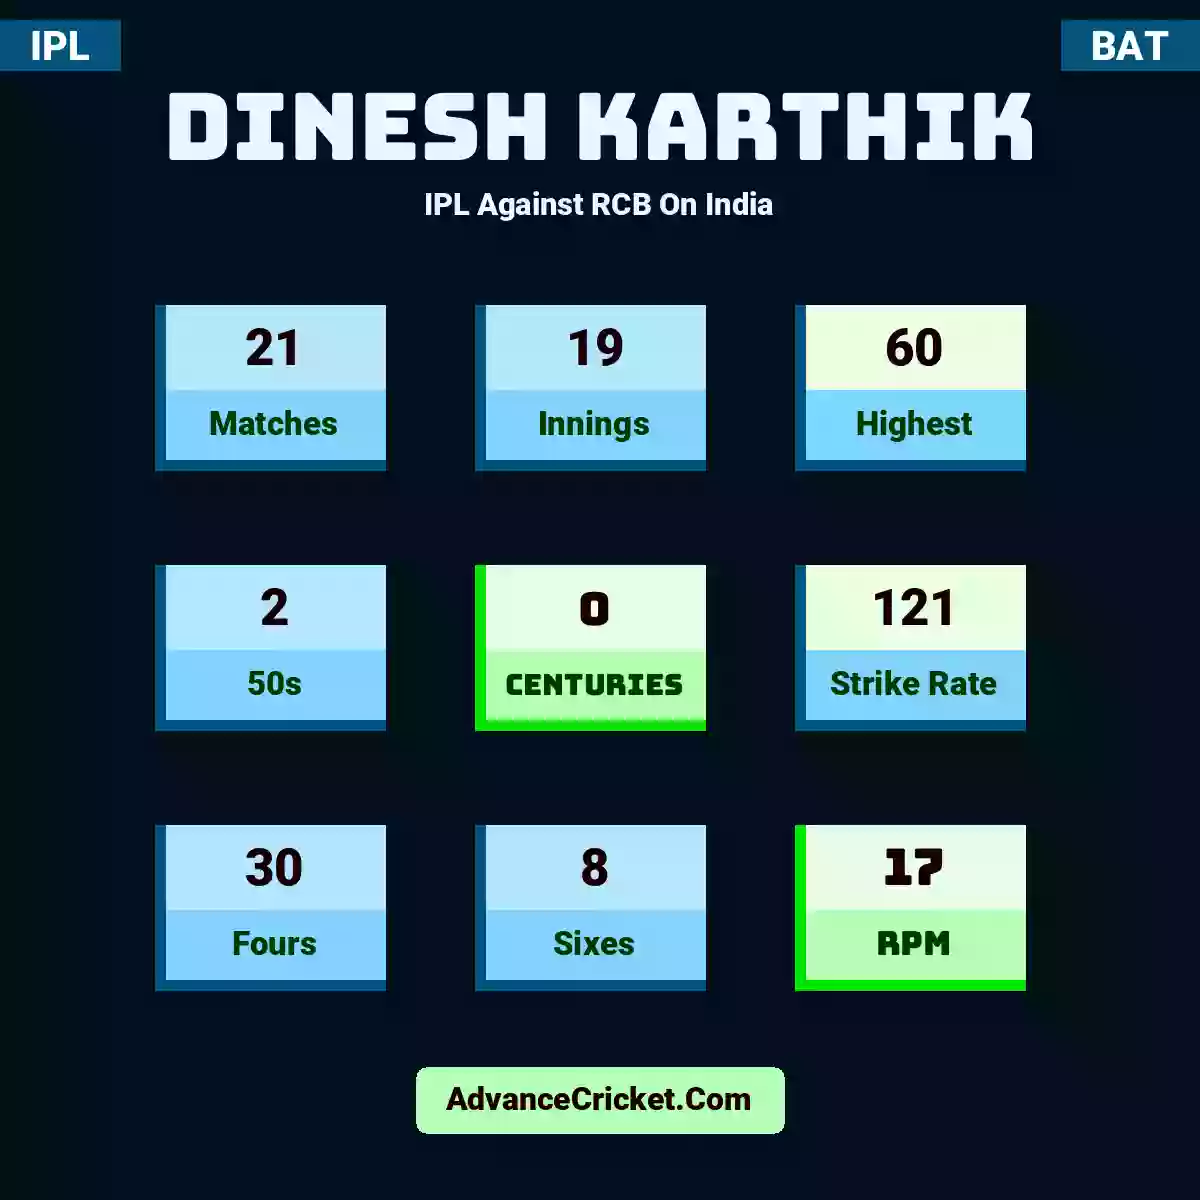 Dinesh Karthik IPL  Against RCB On India, Dinesh Karthik played 21 matches, scored 60 runs as highest, 2 half-centuries, and 0 centuries, with a strike rate of 121. D.Karthik hit 30 fours and 8 sixes, with an RPM of 17.